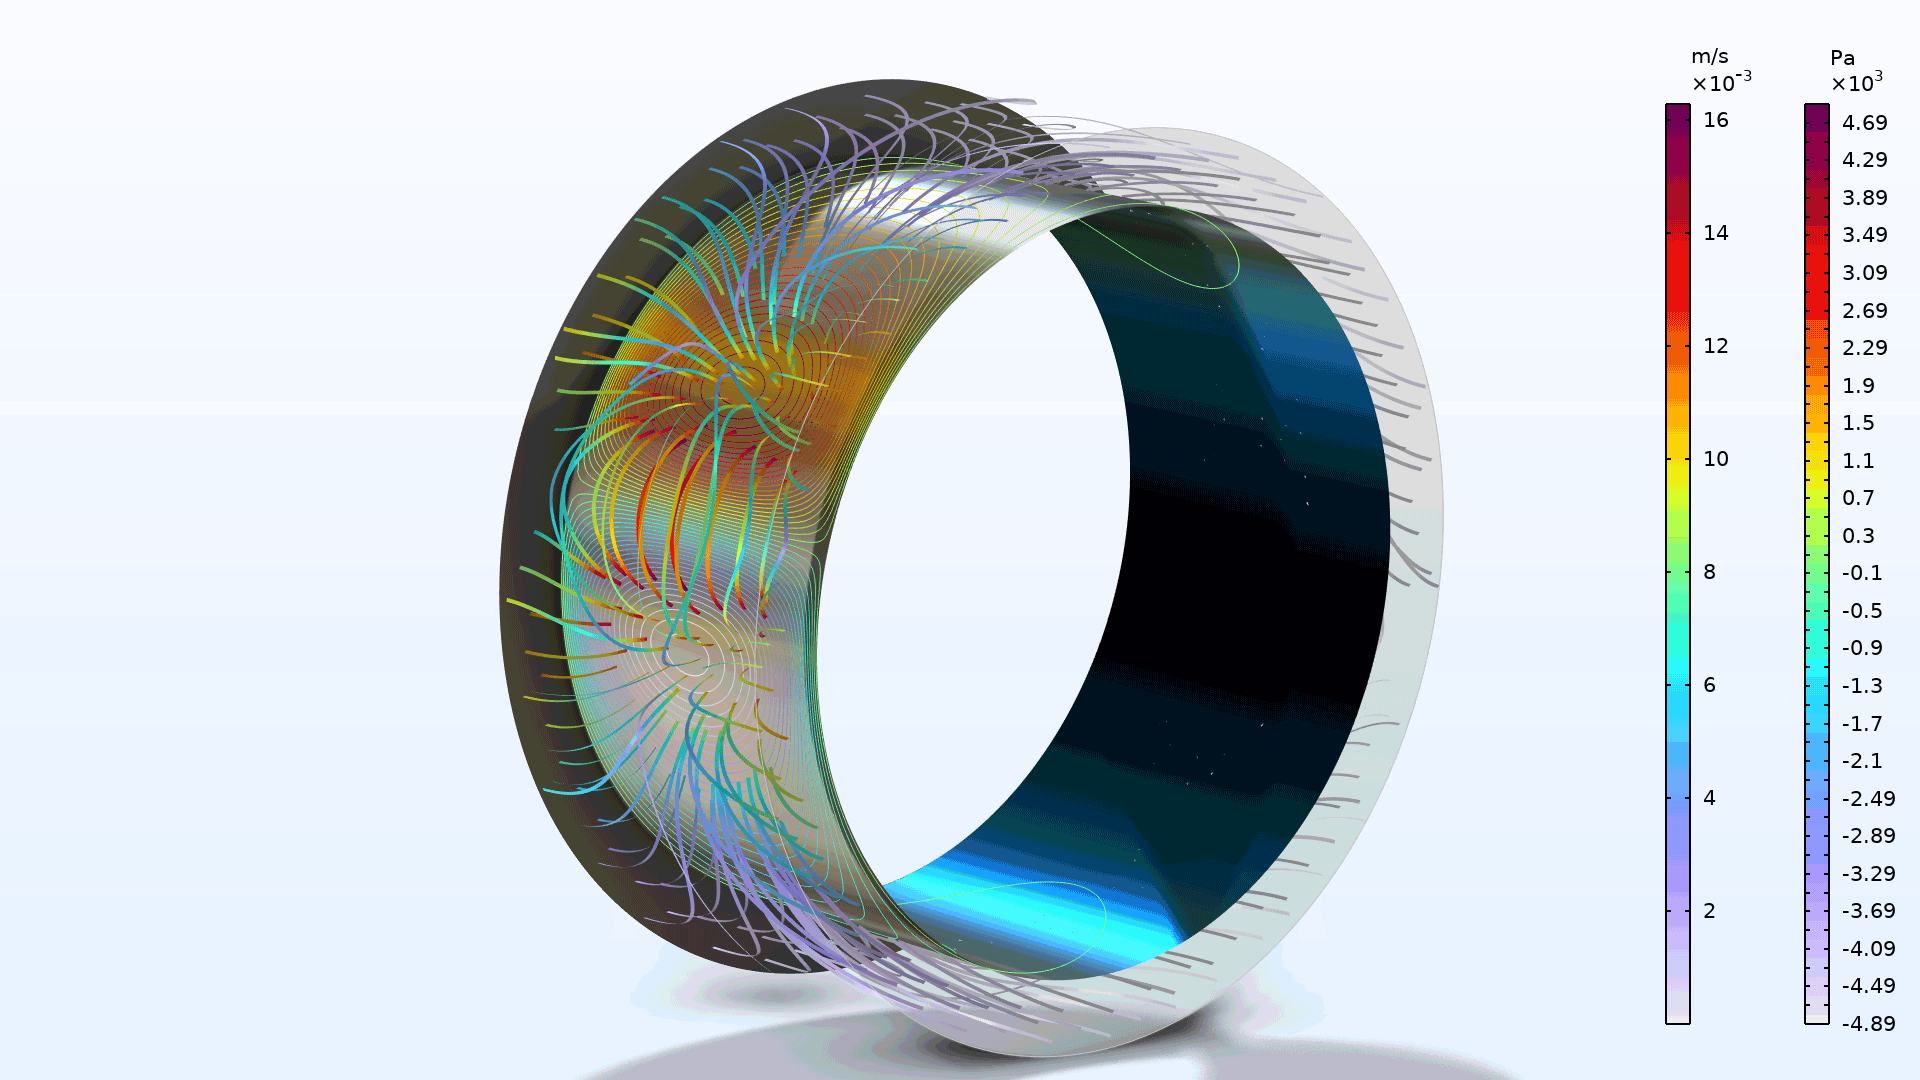 A journal bearing model showing the flow in Prism-colored streamlines.